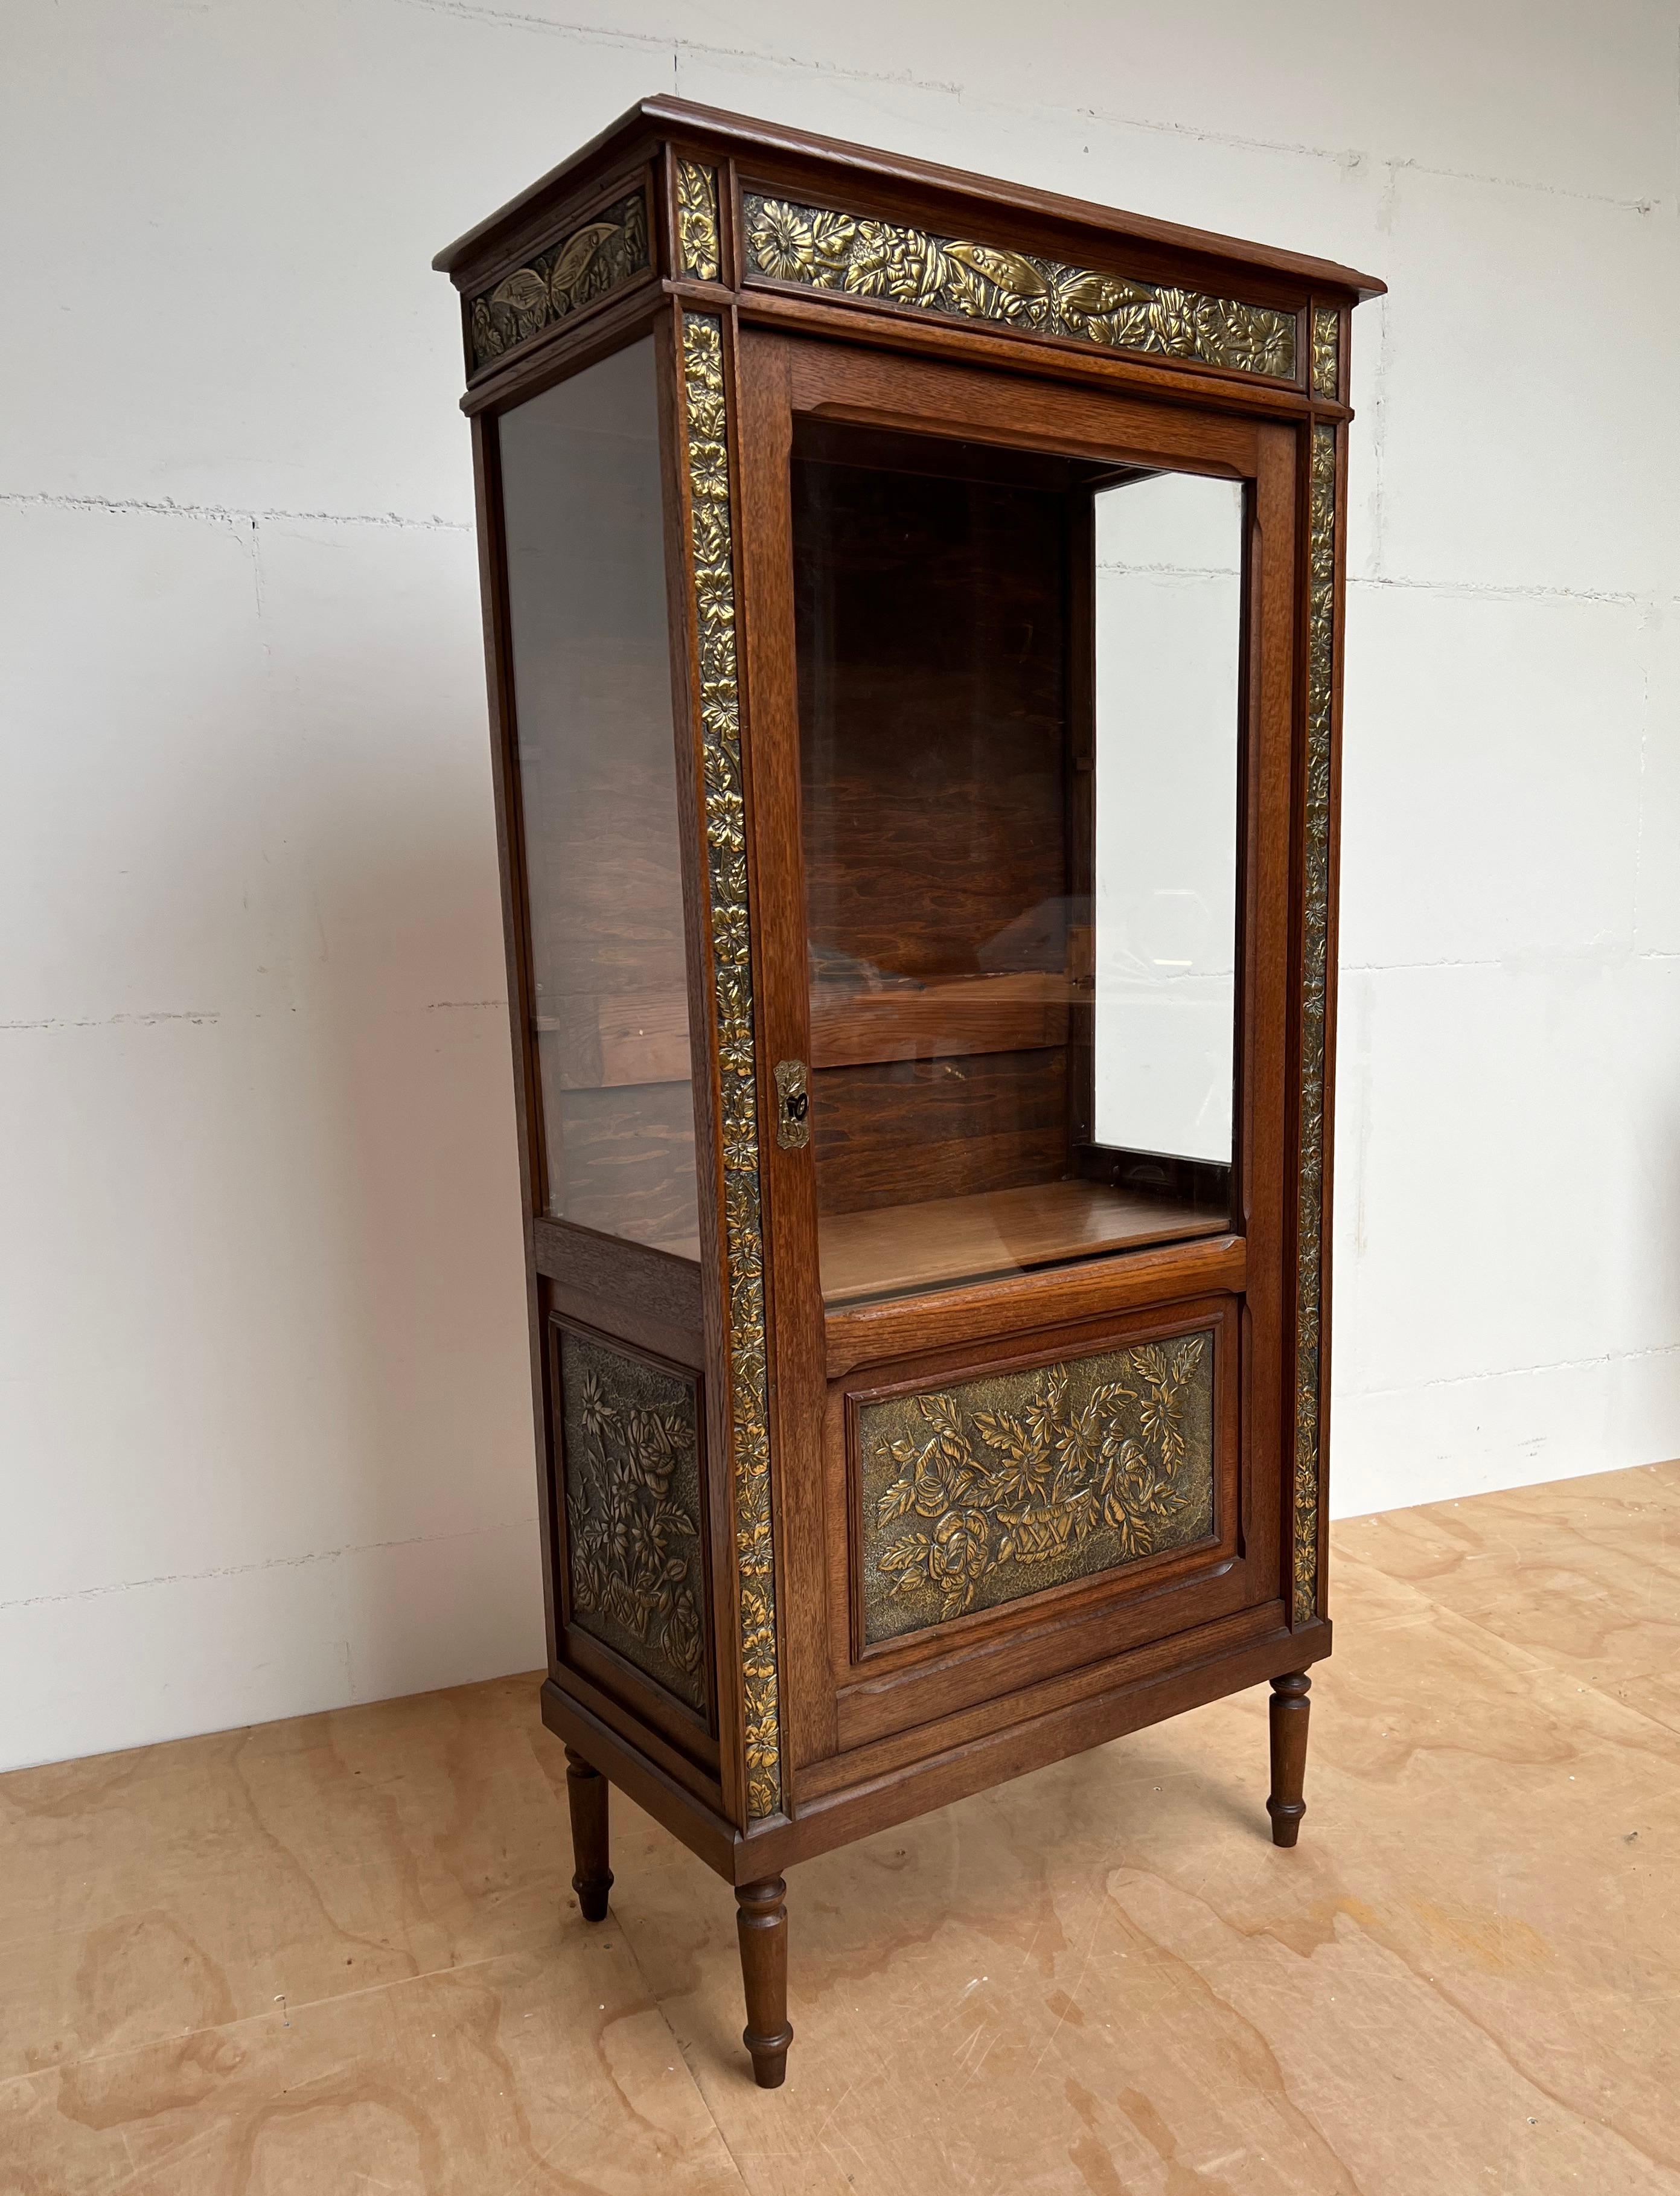 Rare Arts & Crafts Oak Display Cabinet / Vitrine with Embossed Brass Decorations For Sale 4